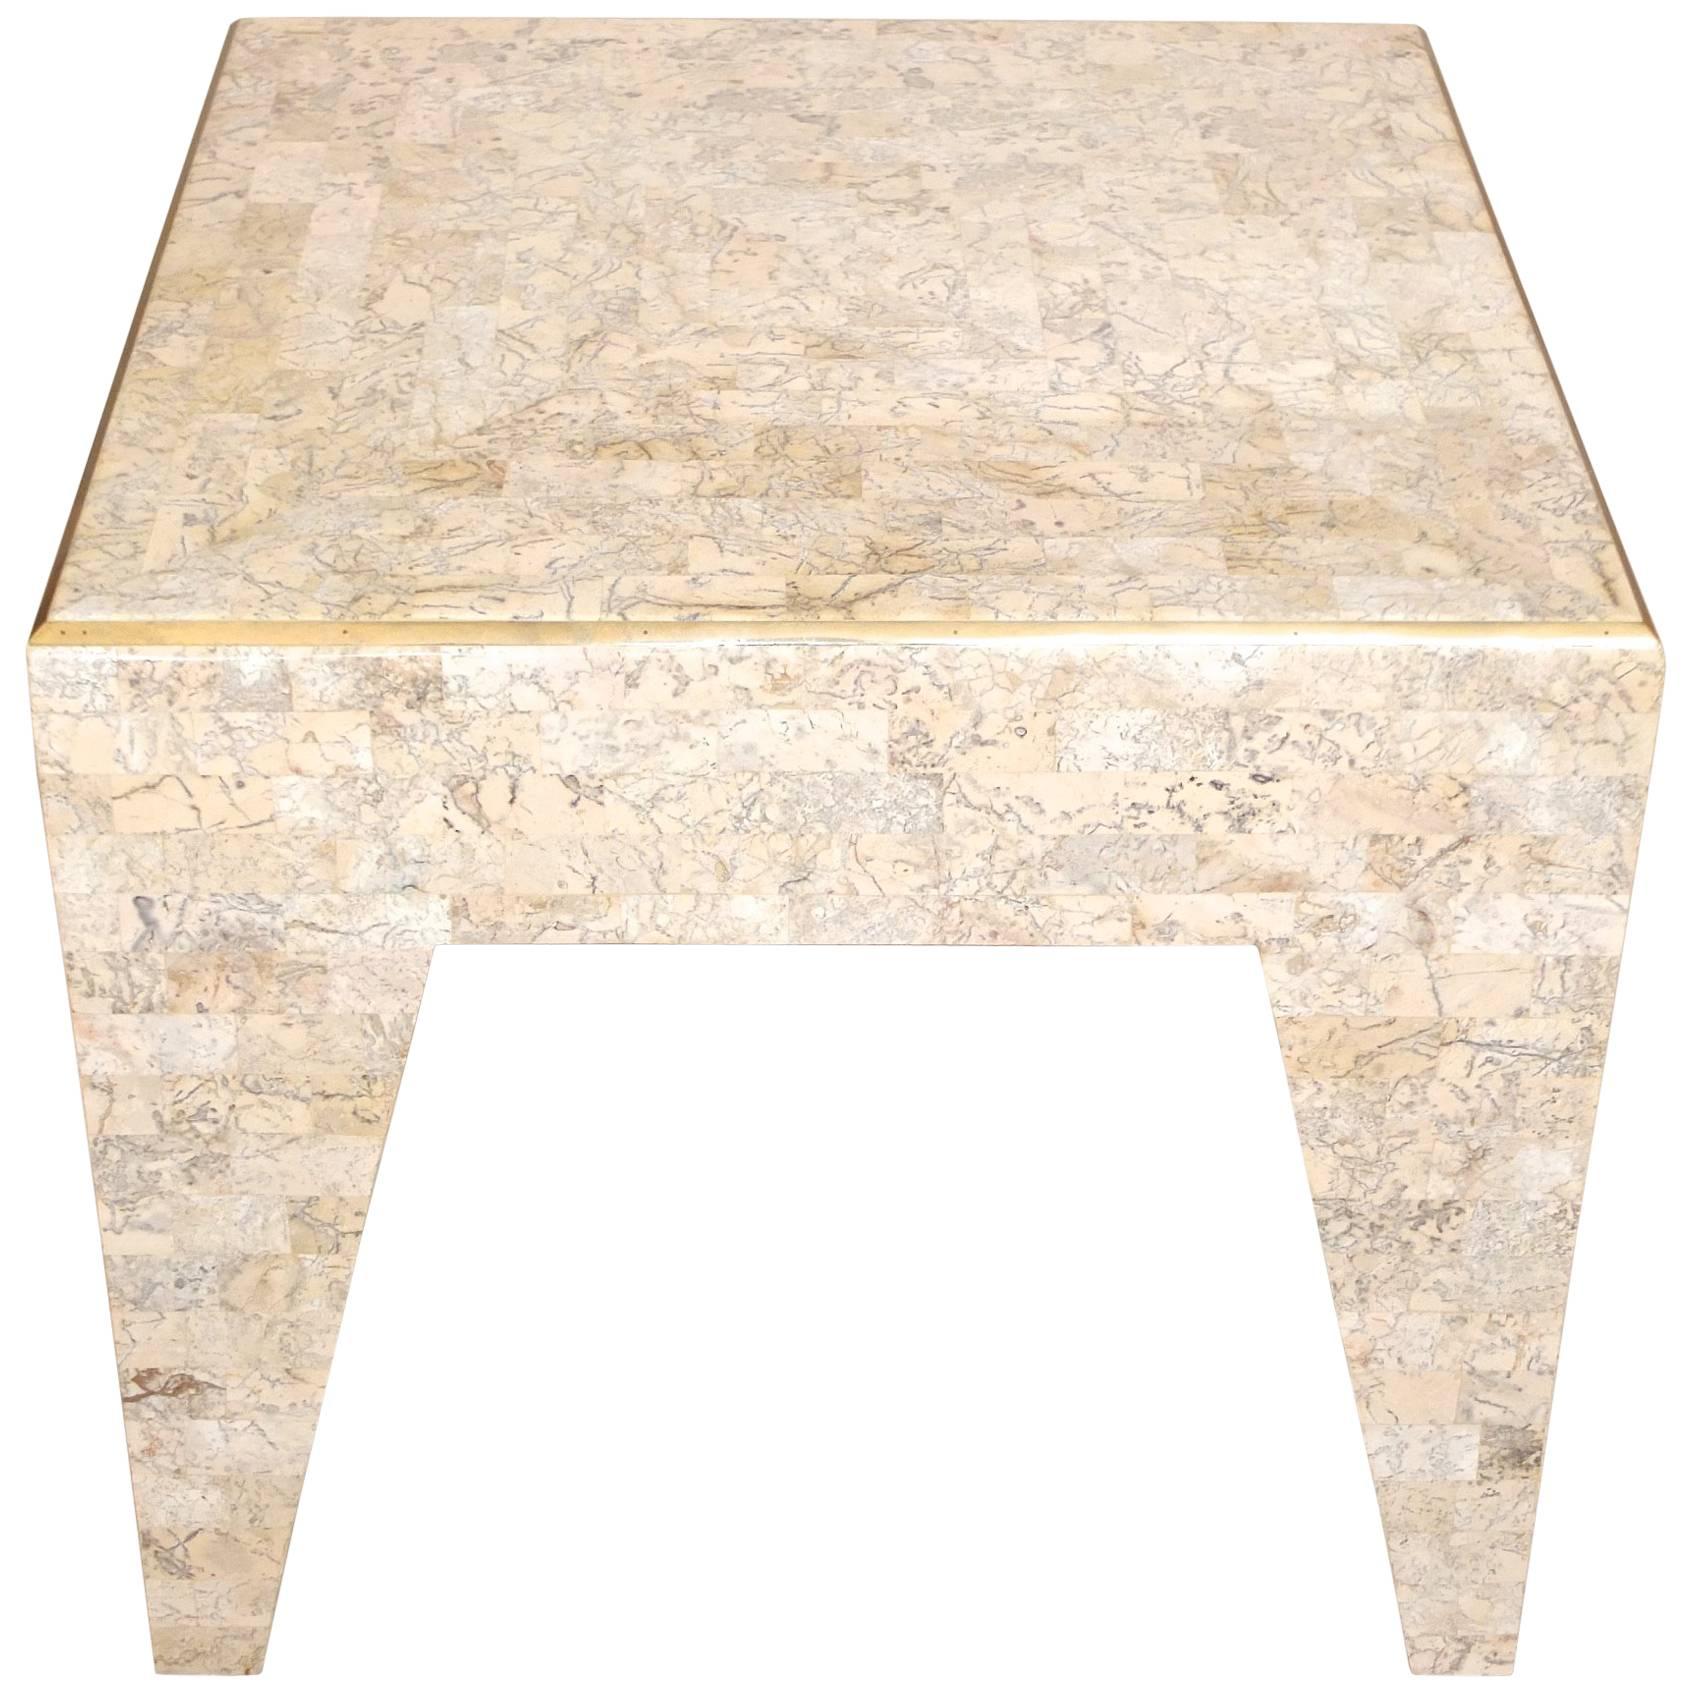 Tessellated Stone and Brass Square Occasional Table by Maitland Smith